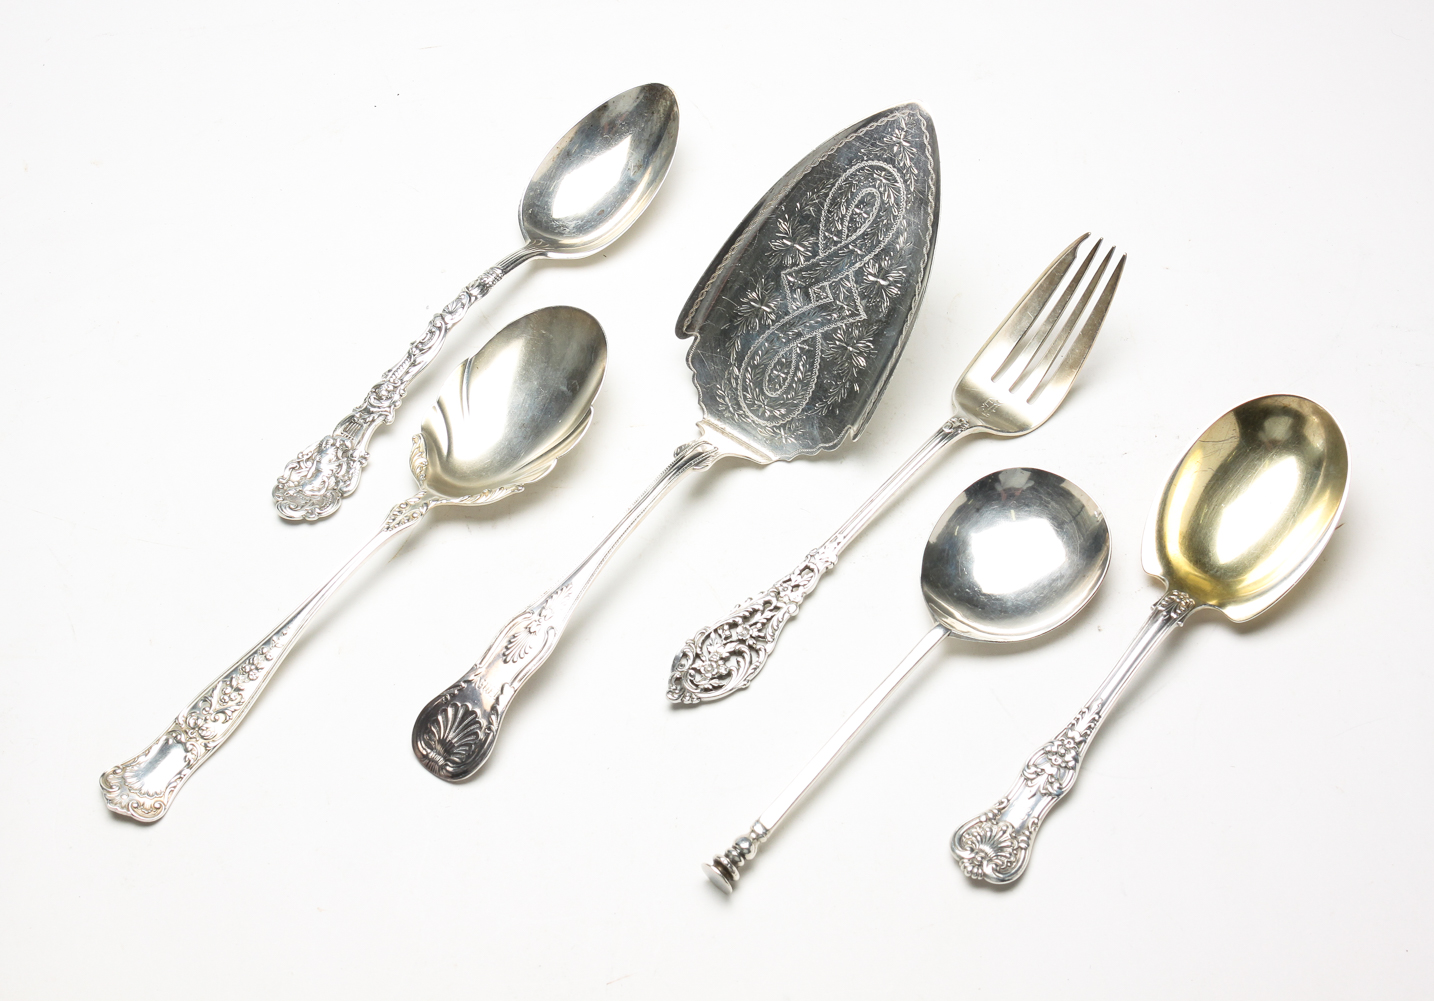 SIX STERLING SERVING PIECES An 2dff1b